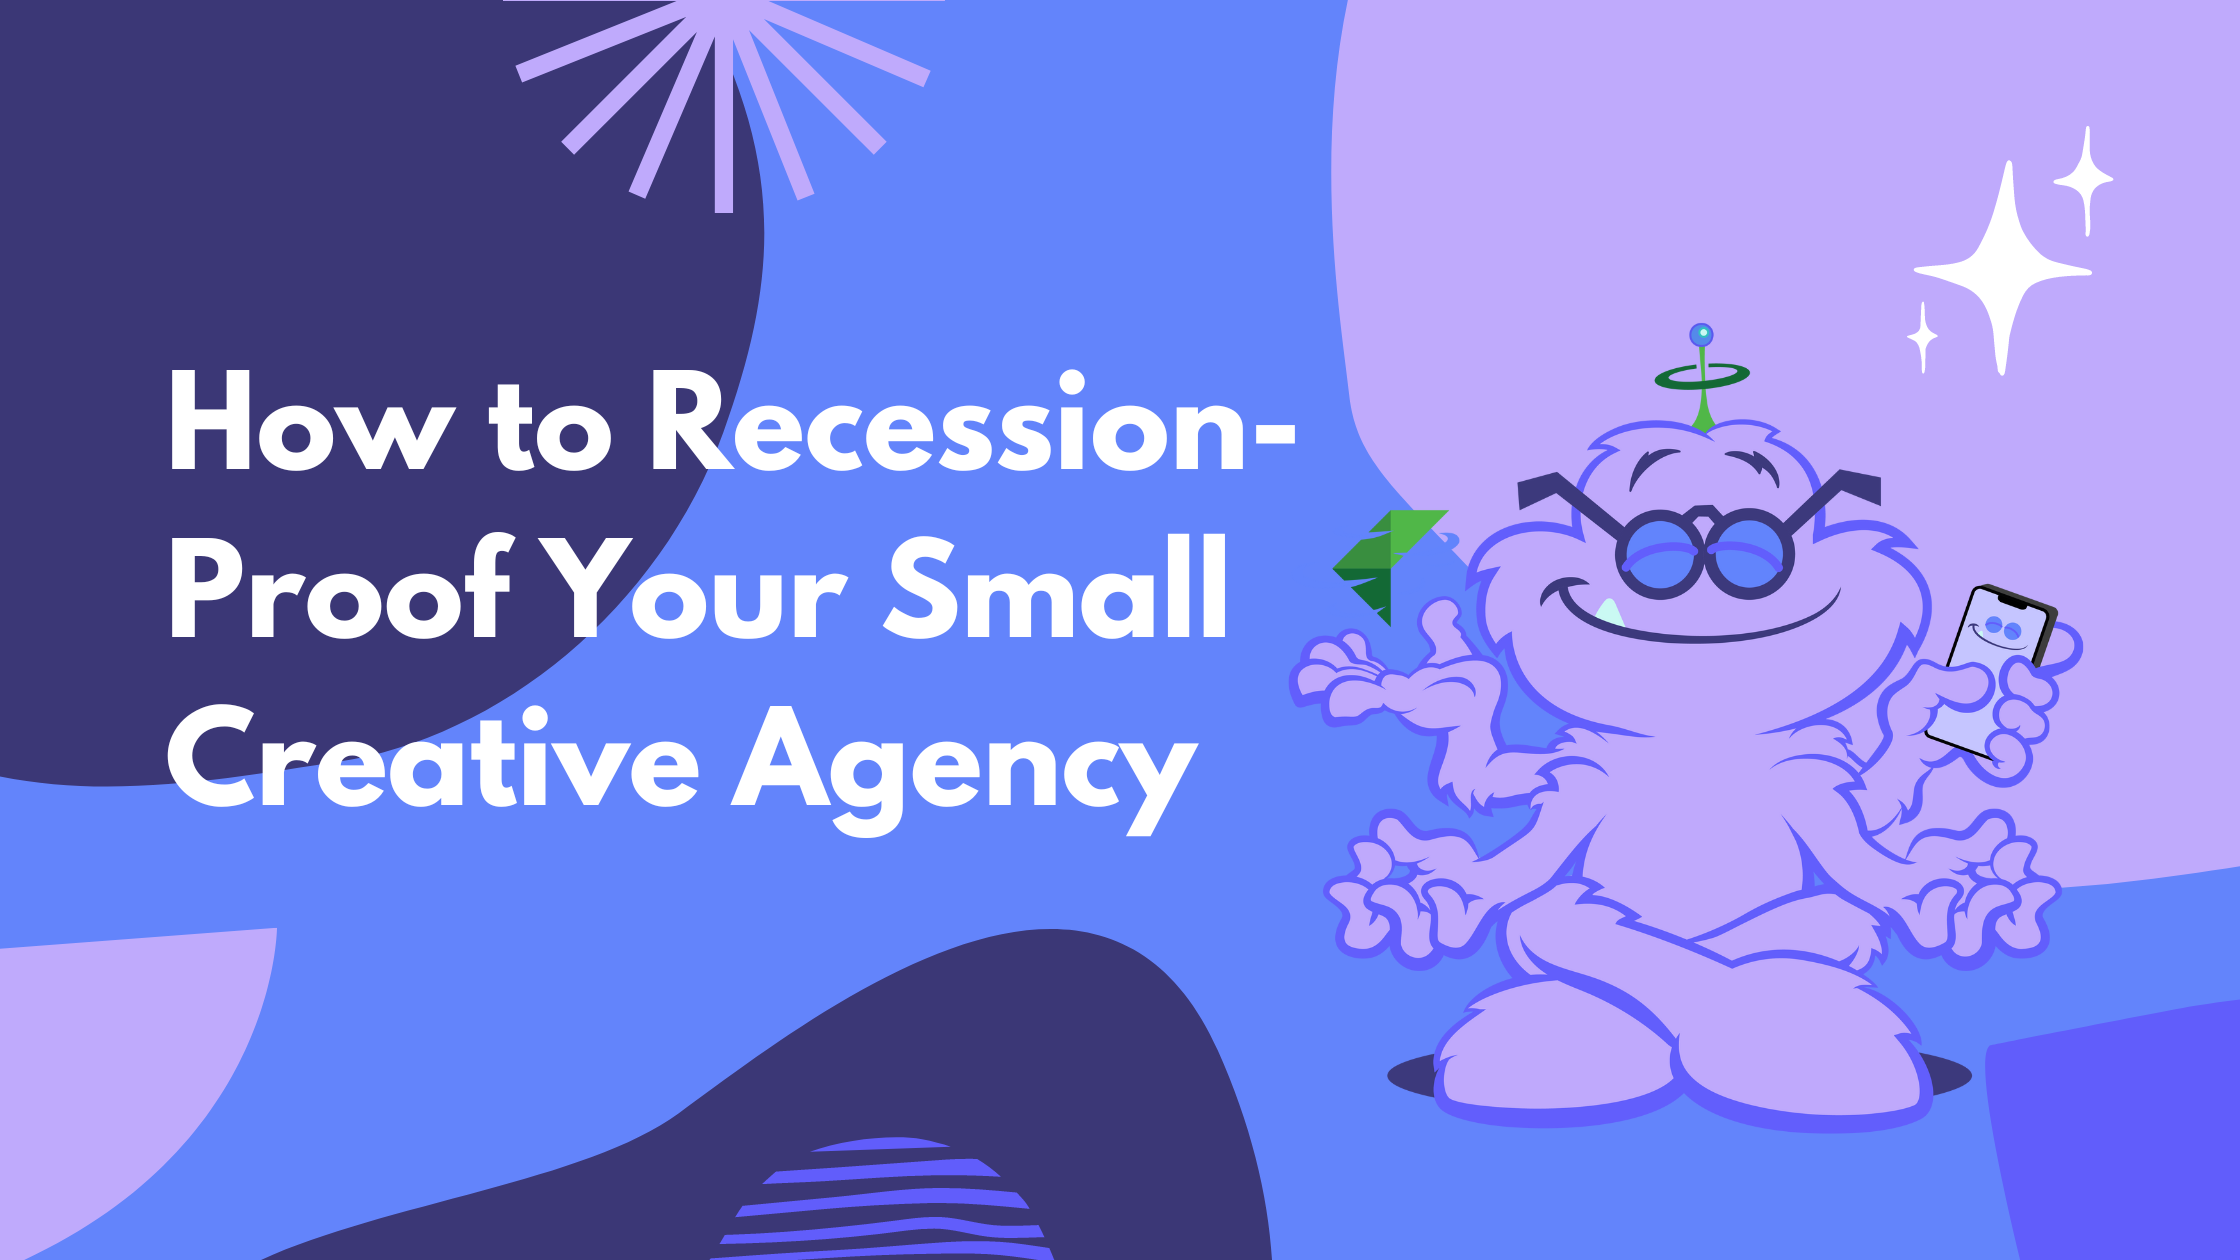 How to Recession-Proof Your Small Creative Agency